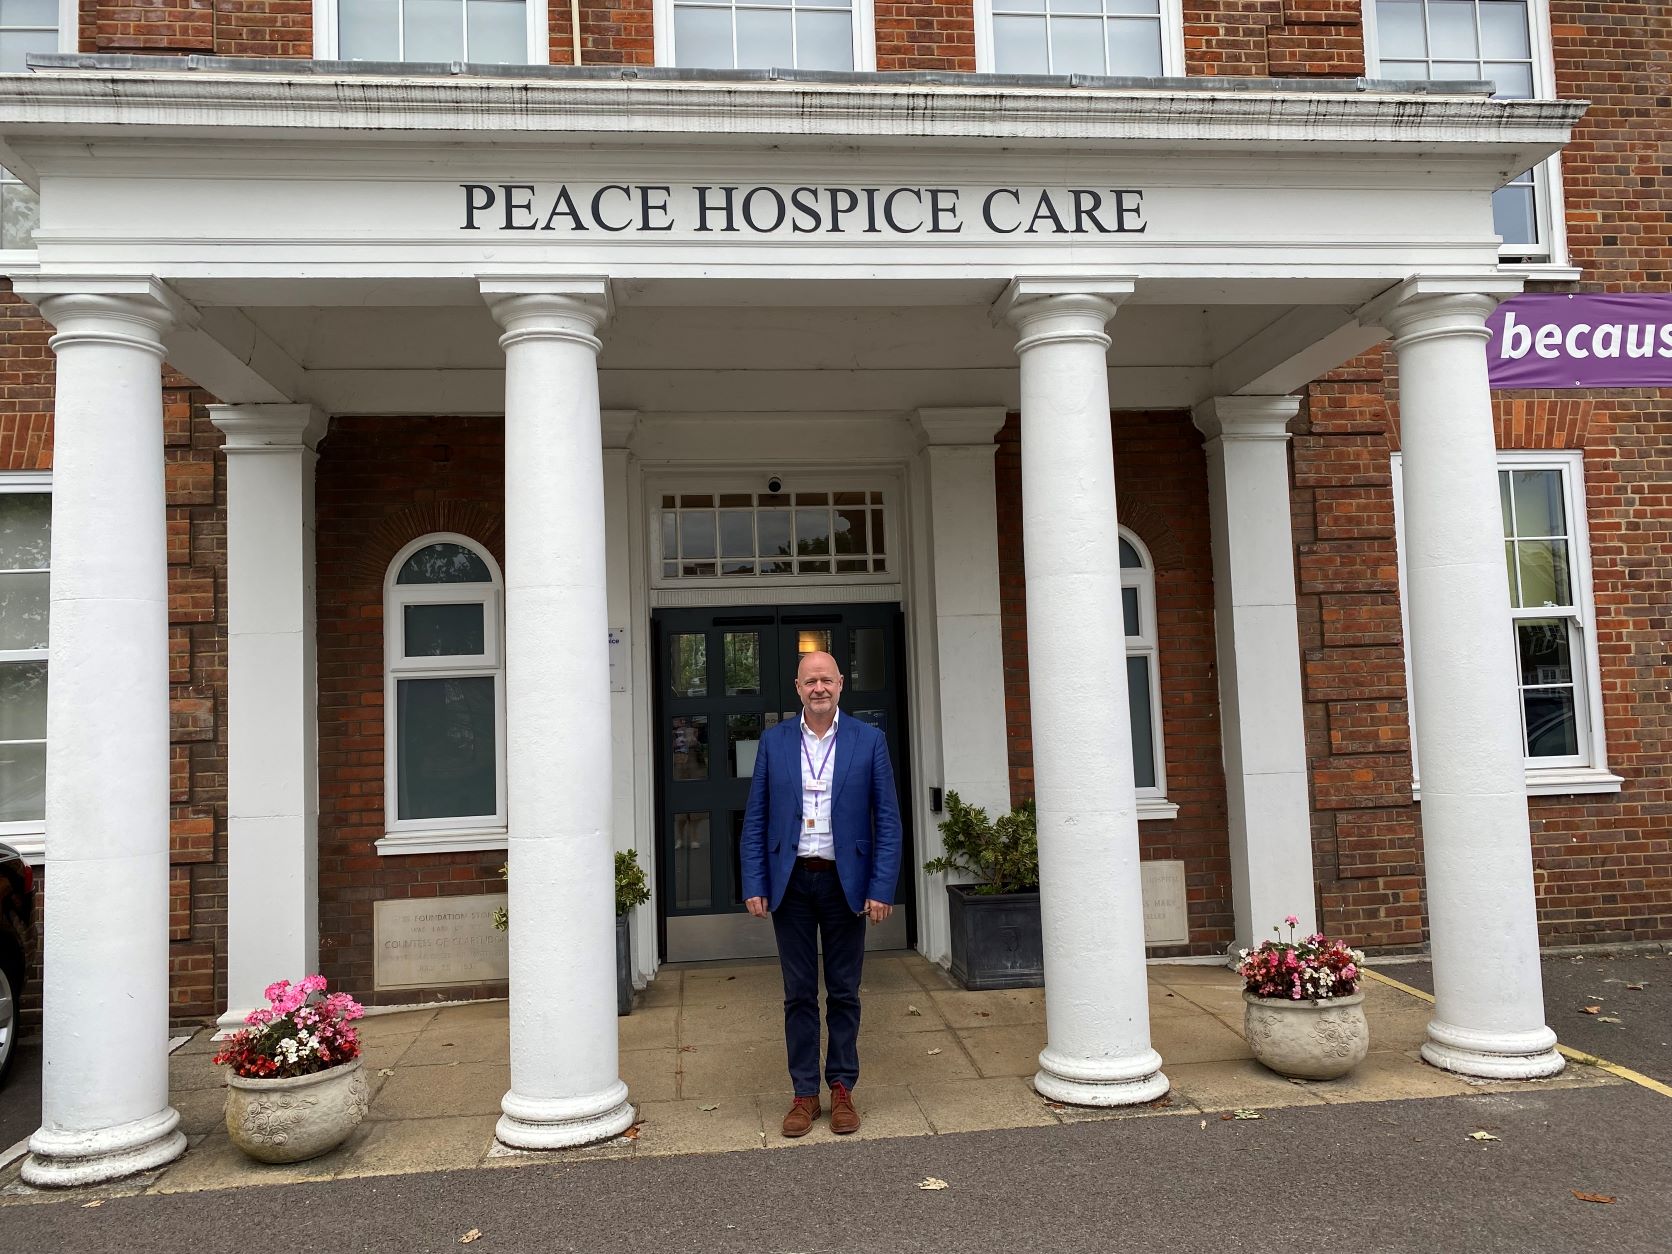 Merger with Peace Hospice Care goes ahead